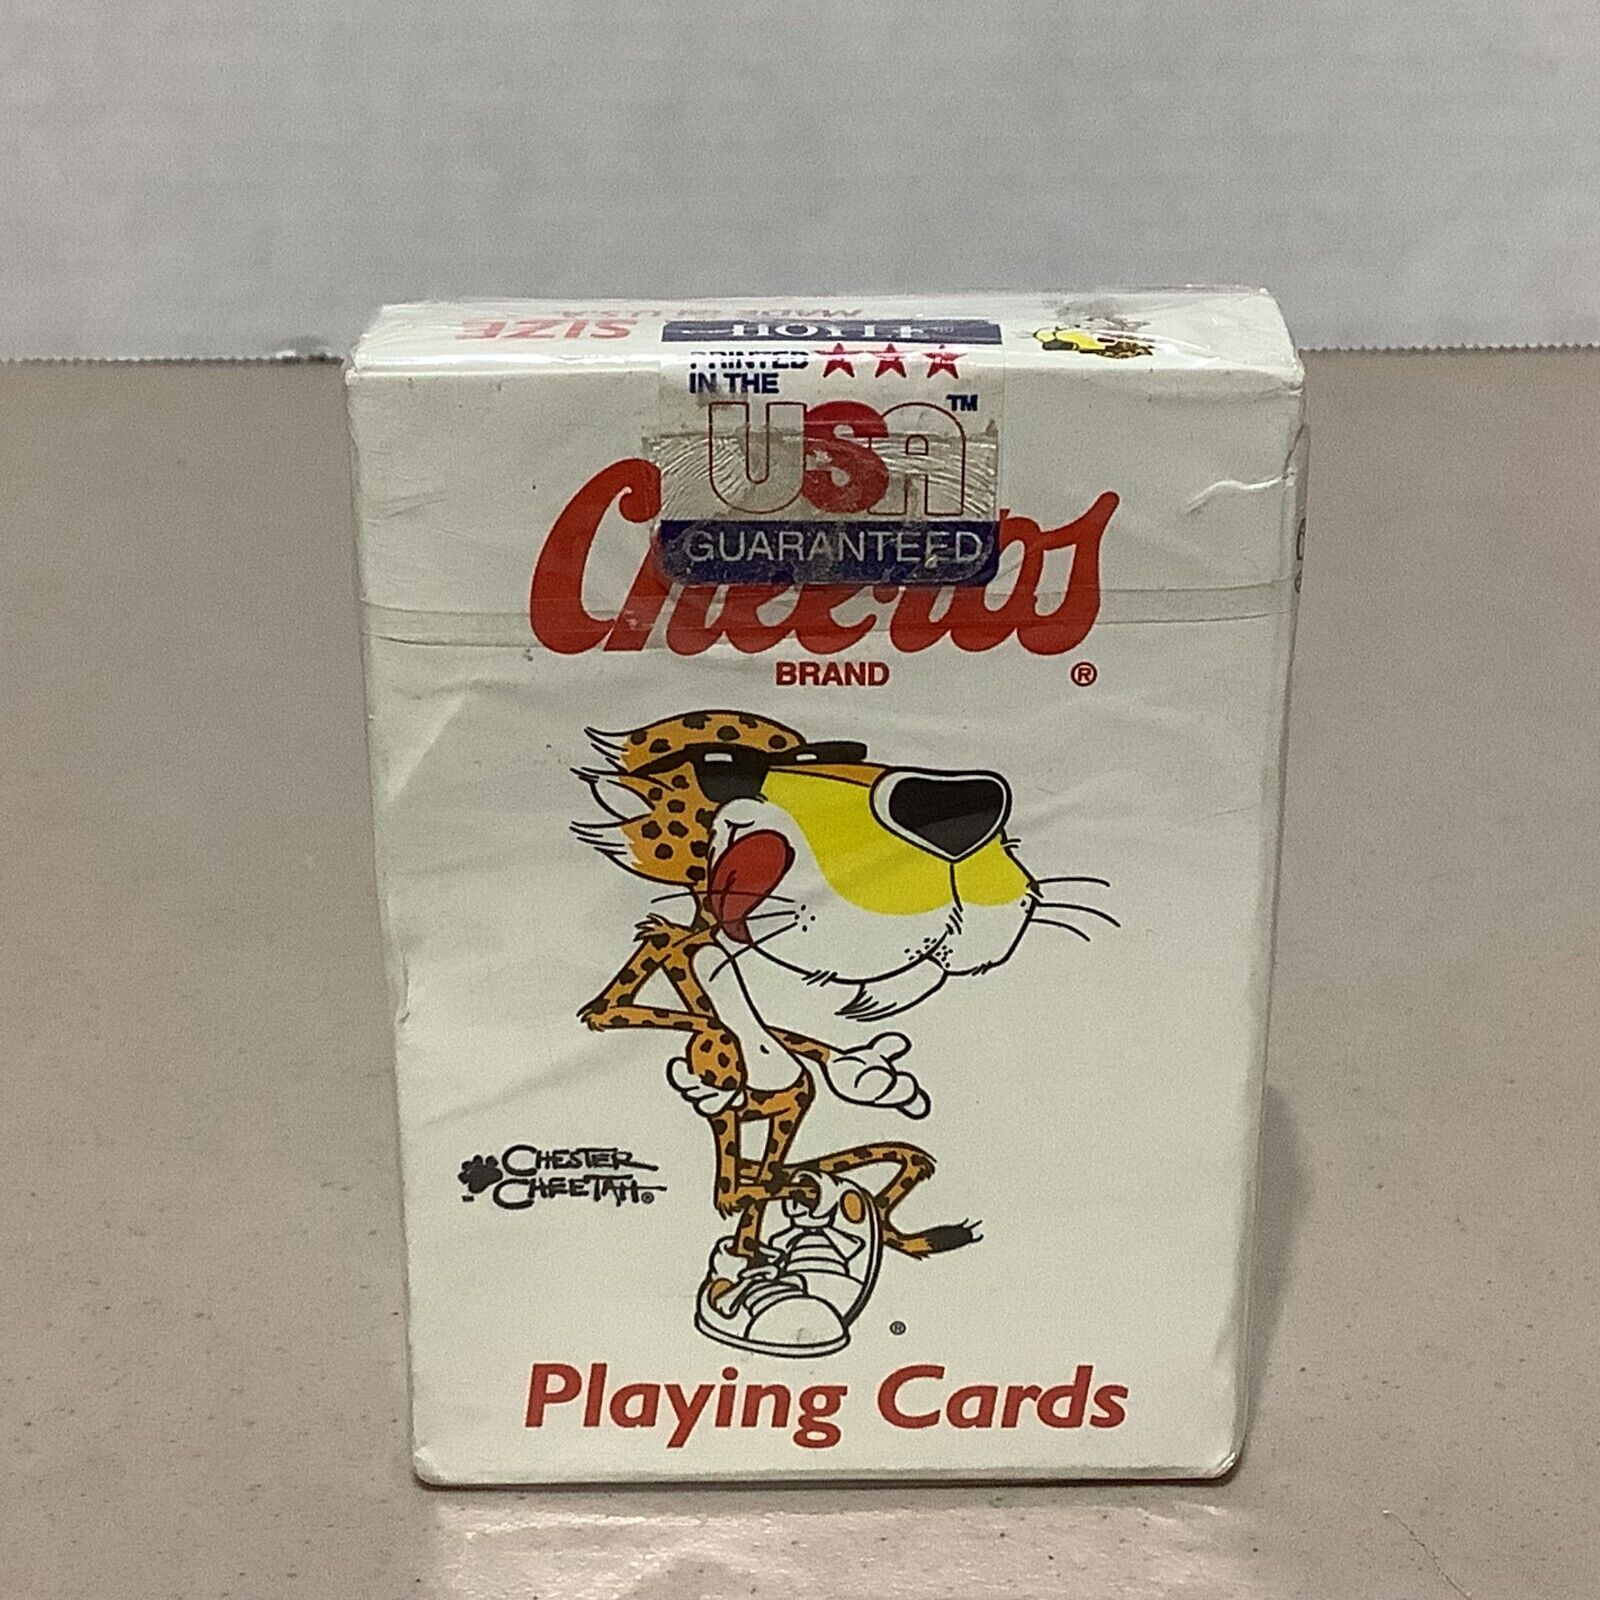 Vintage Cheetos Sealed Deck of Playing Cards by Hoyle - Made in USA